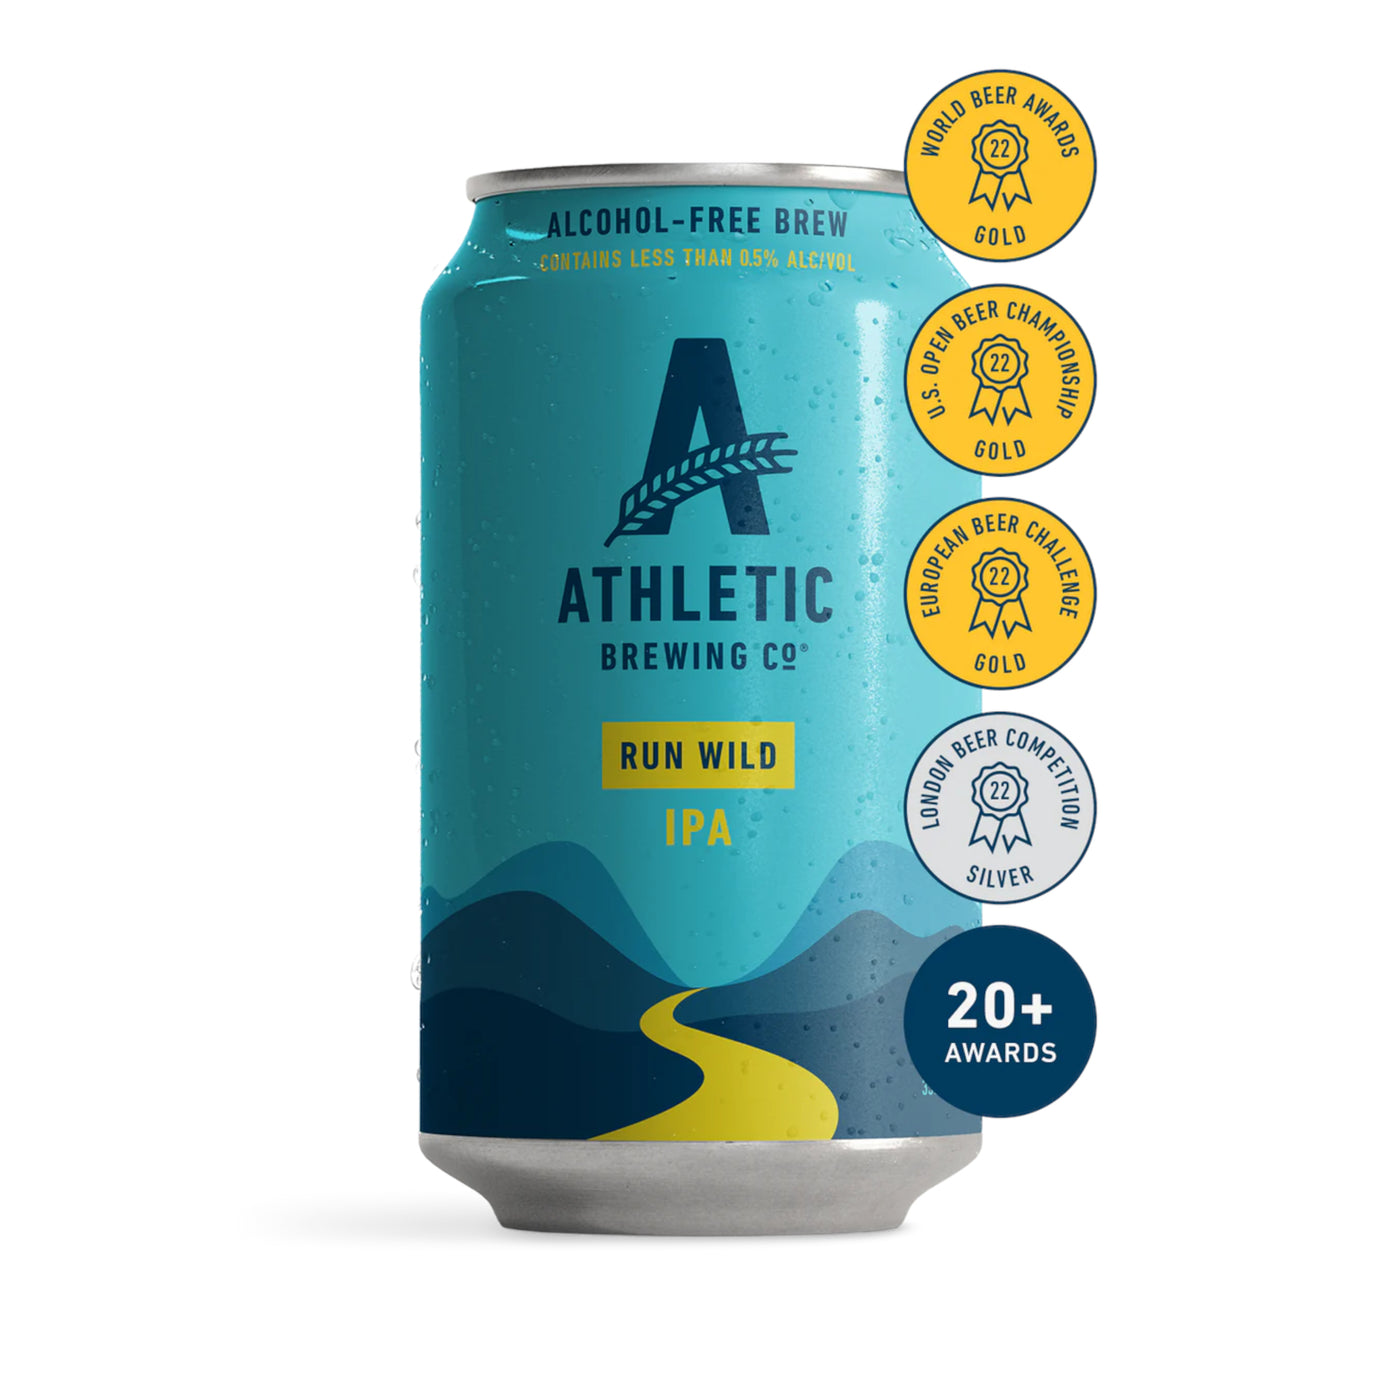 Athletic Brewing Co Non Alcoholic beer Run Wild IPA, front of can